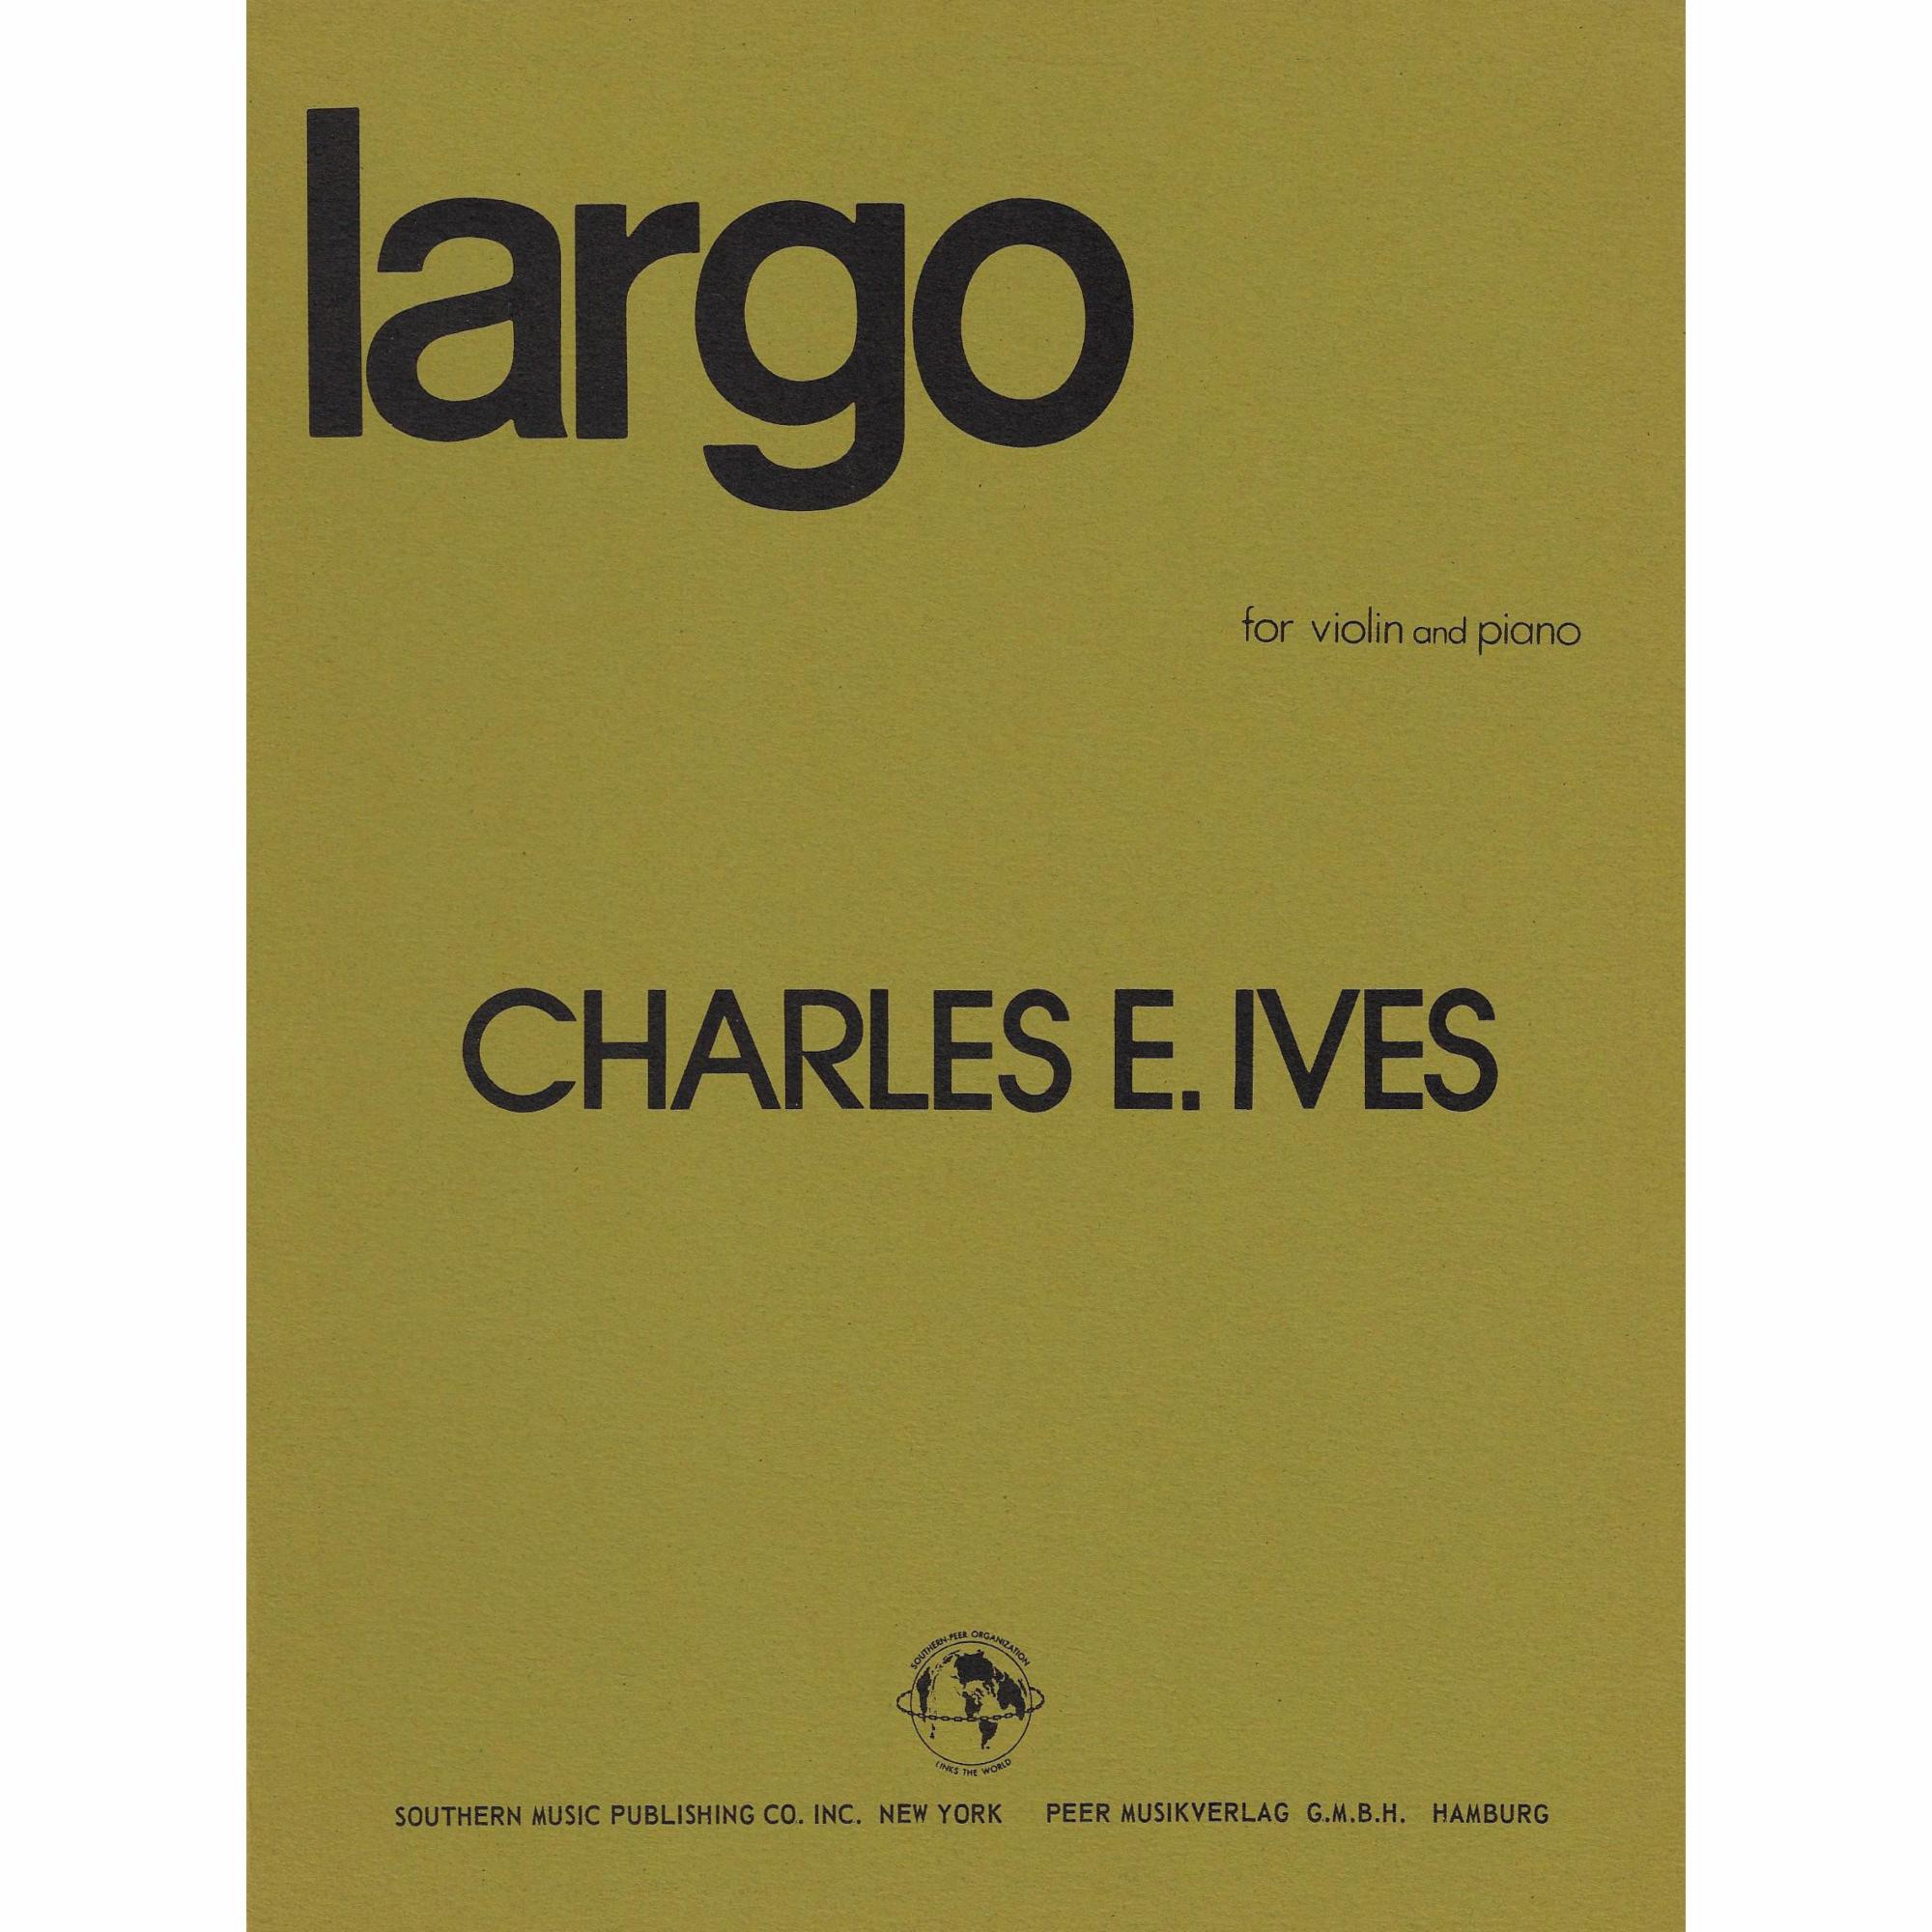 Ives -- Largo for Violin and Piano